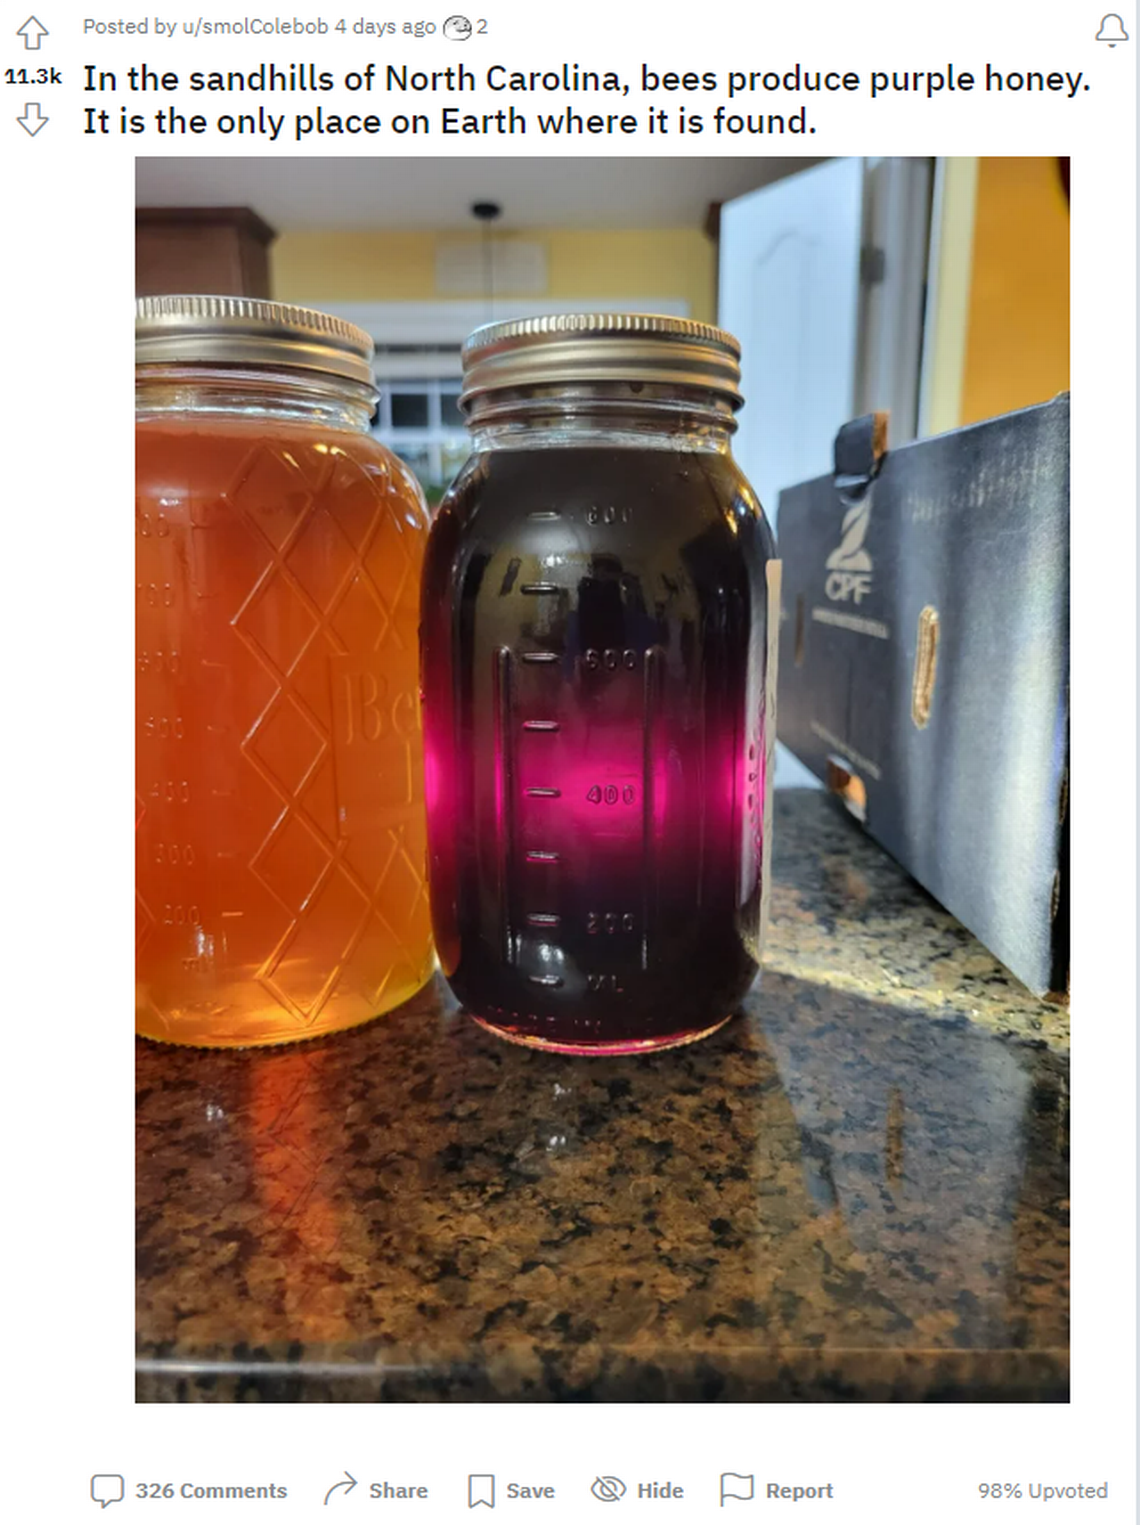 A screenshot of a viral Reddit post, published Sept. 10. It says, “In the sandhills of North Carolina, bees produce purple honey. It is the only place on Earth where it is found.” 